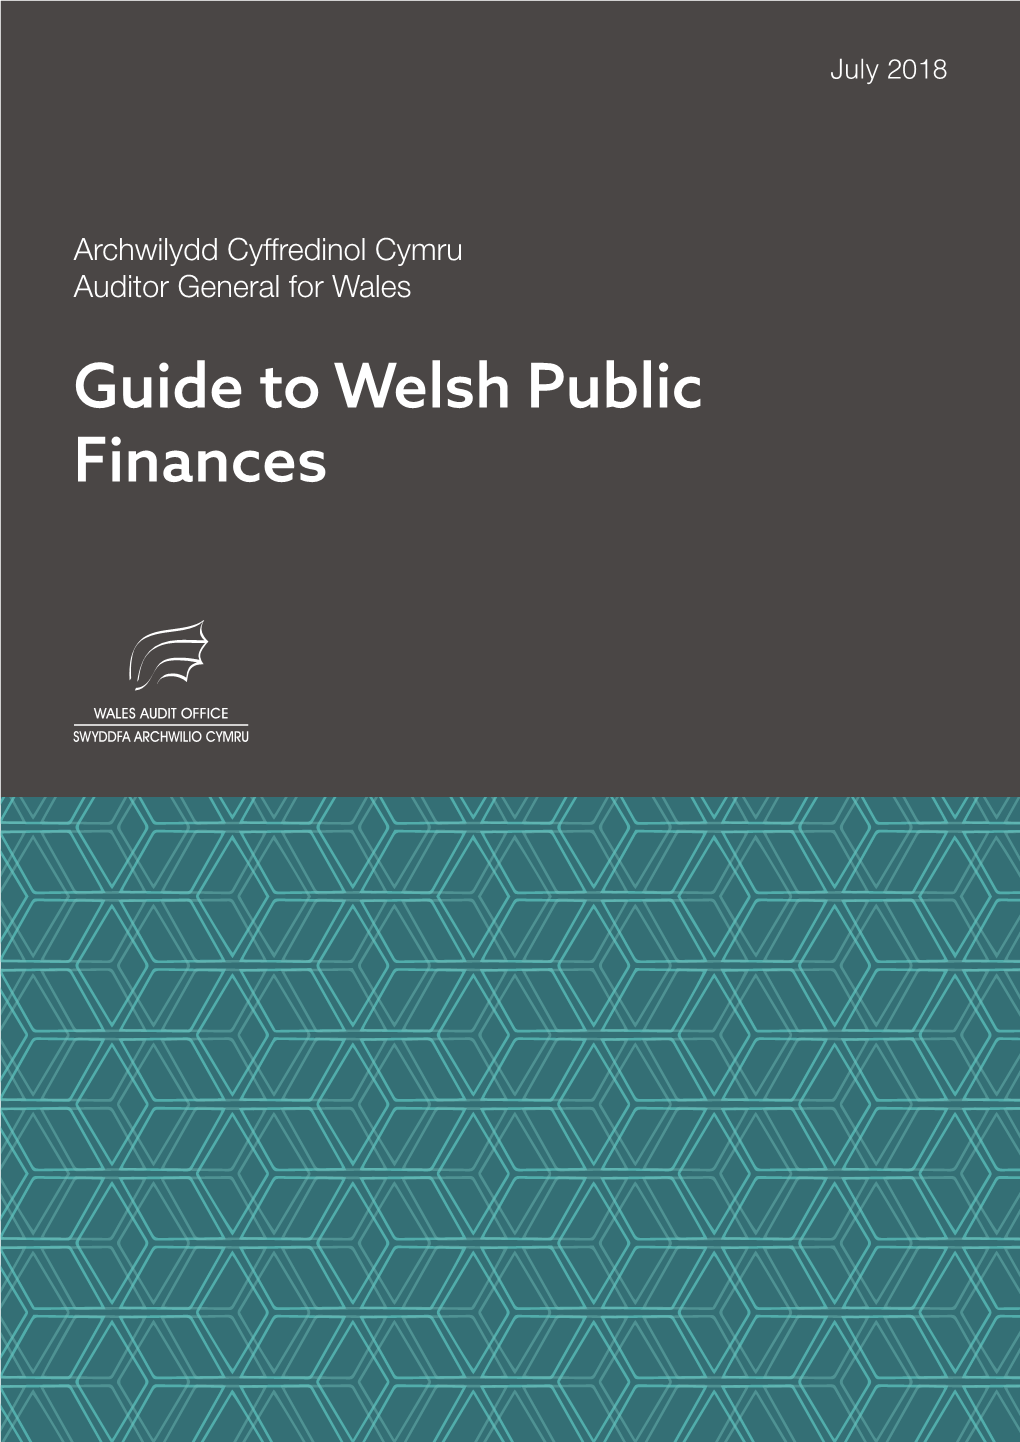 Guide to Welsh Public Finances I Have Prepared and Published This Report in Accordance with the Public Audit (Wales) Act 2013